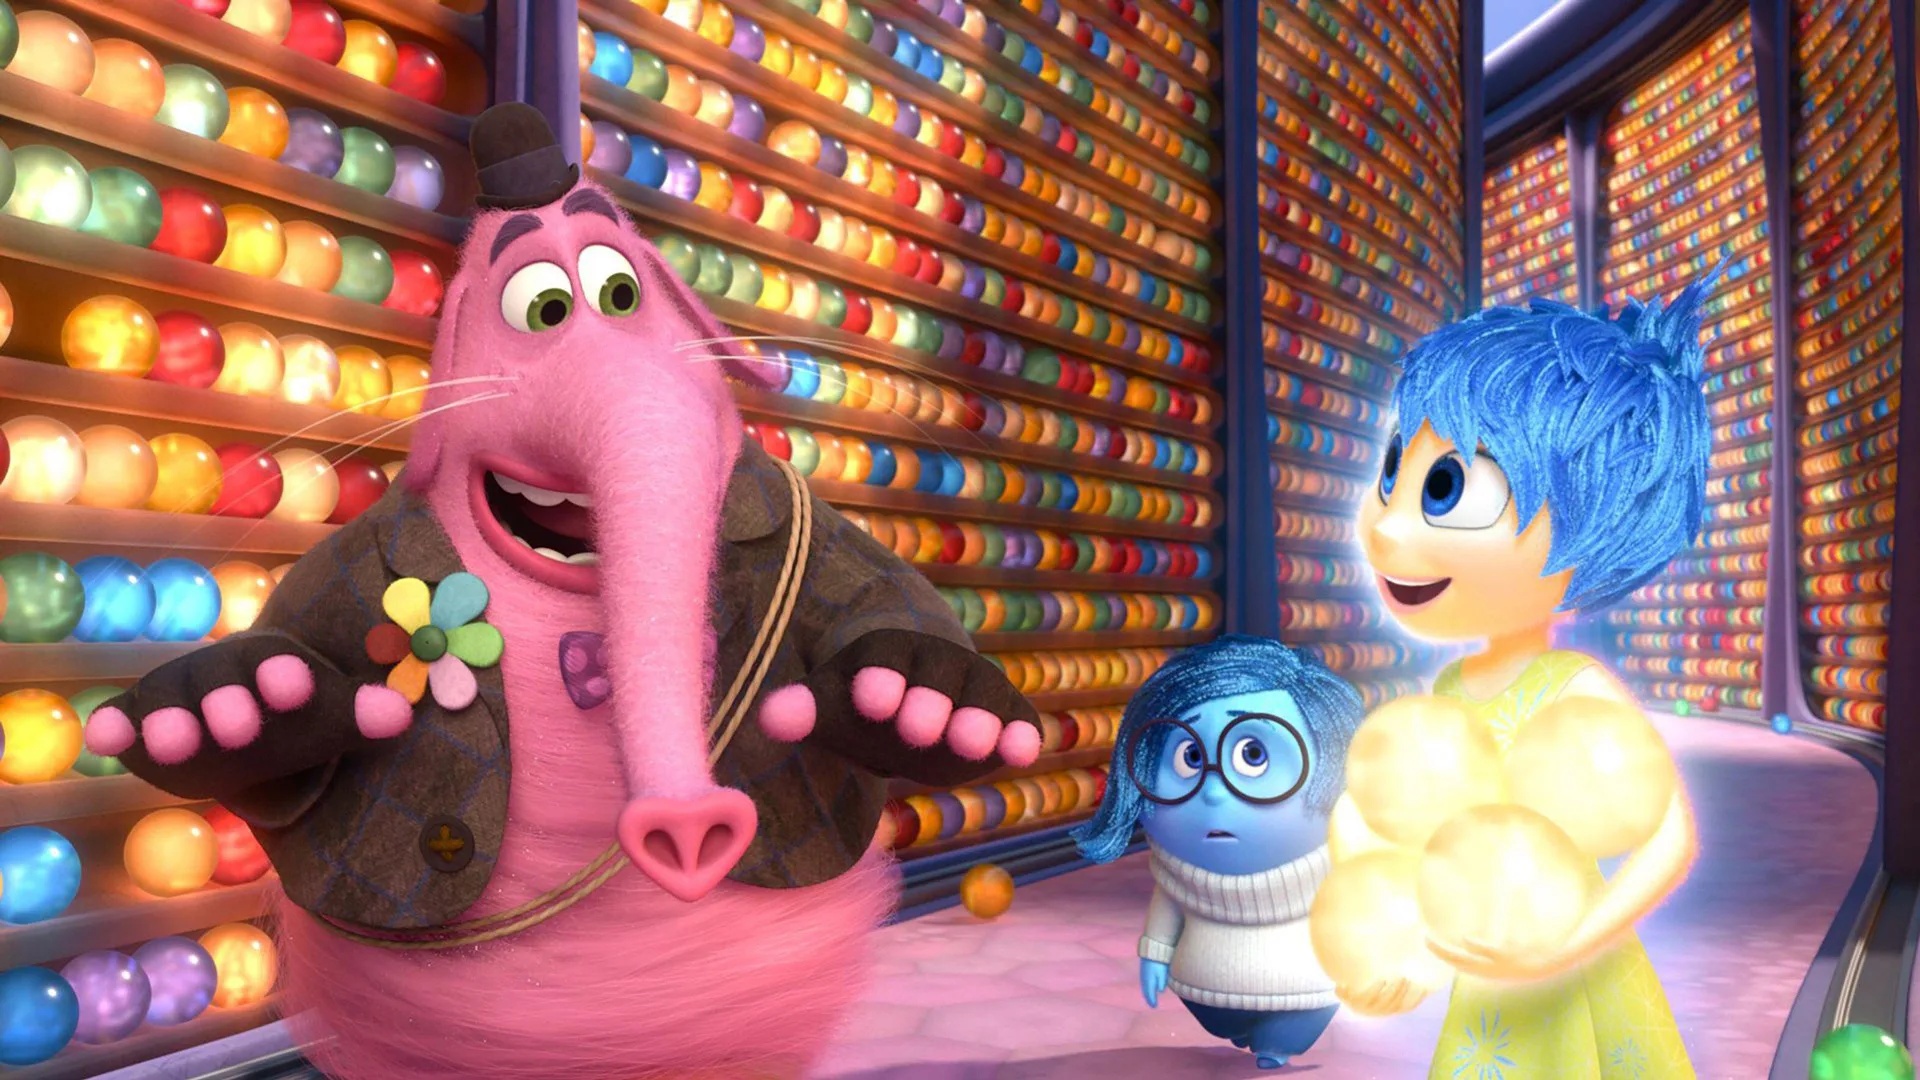 A scene from Disney/Pixar's Inside Out showing Bing Bong and Joy walking with Sadness trailing behind. In the background are the memory balls on shelves.